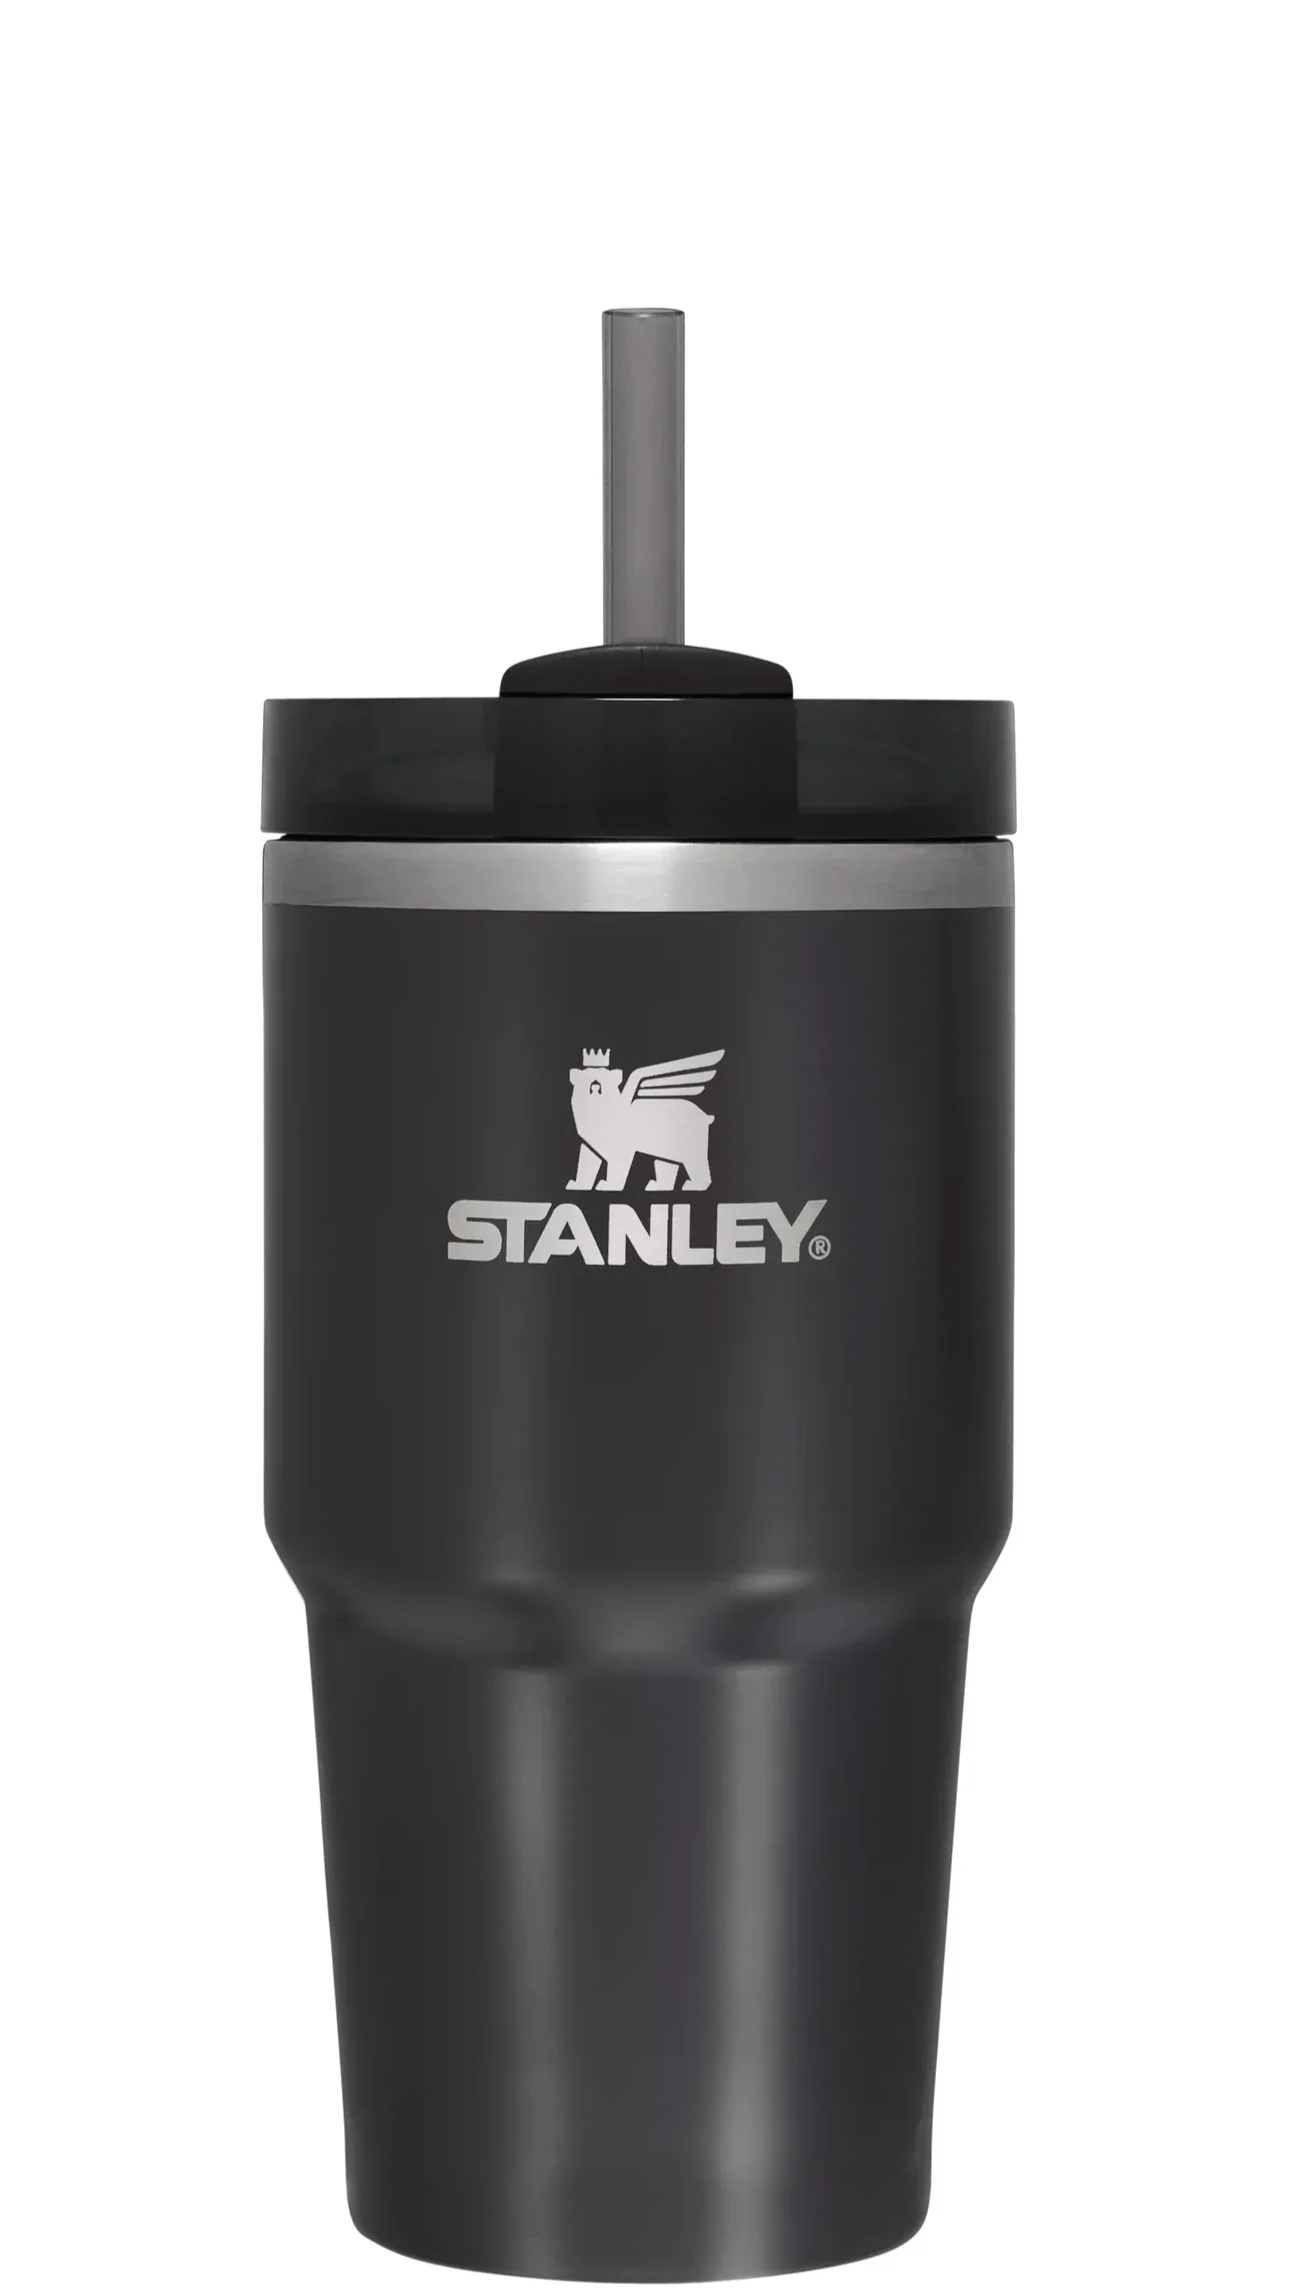  Stanley Classic Stay-Chill Beer Pint 16oz Charcoal Glow : Home  & Kitchen